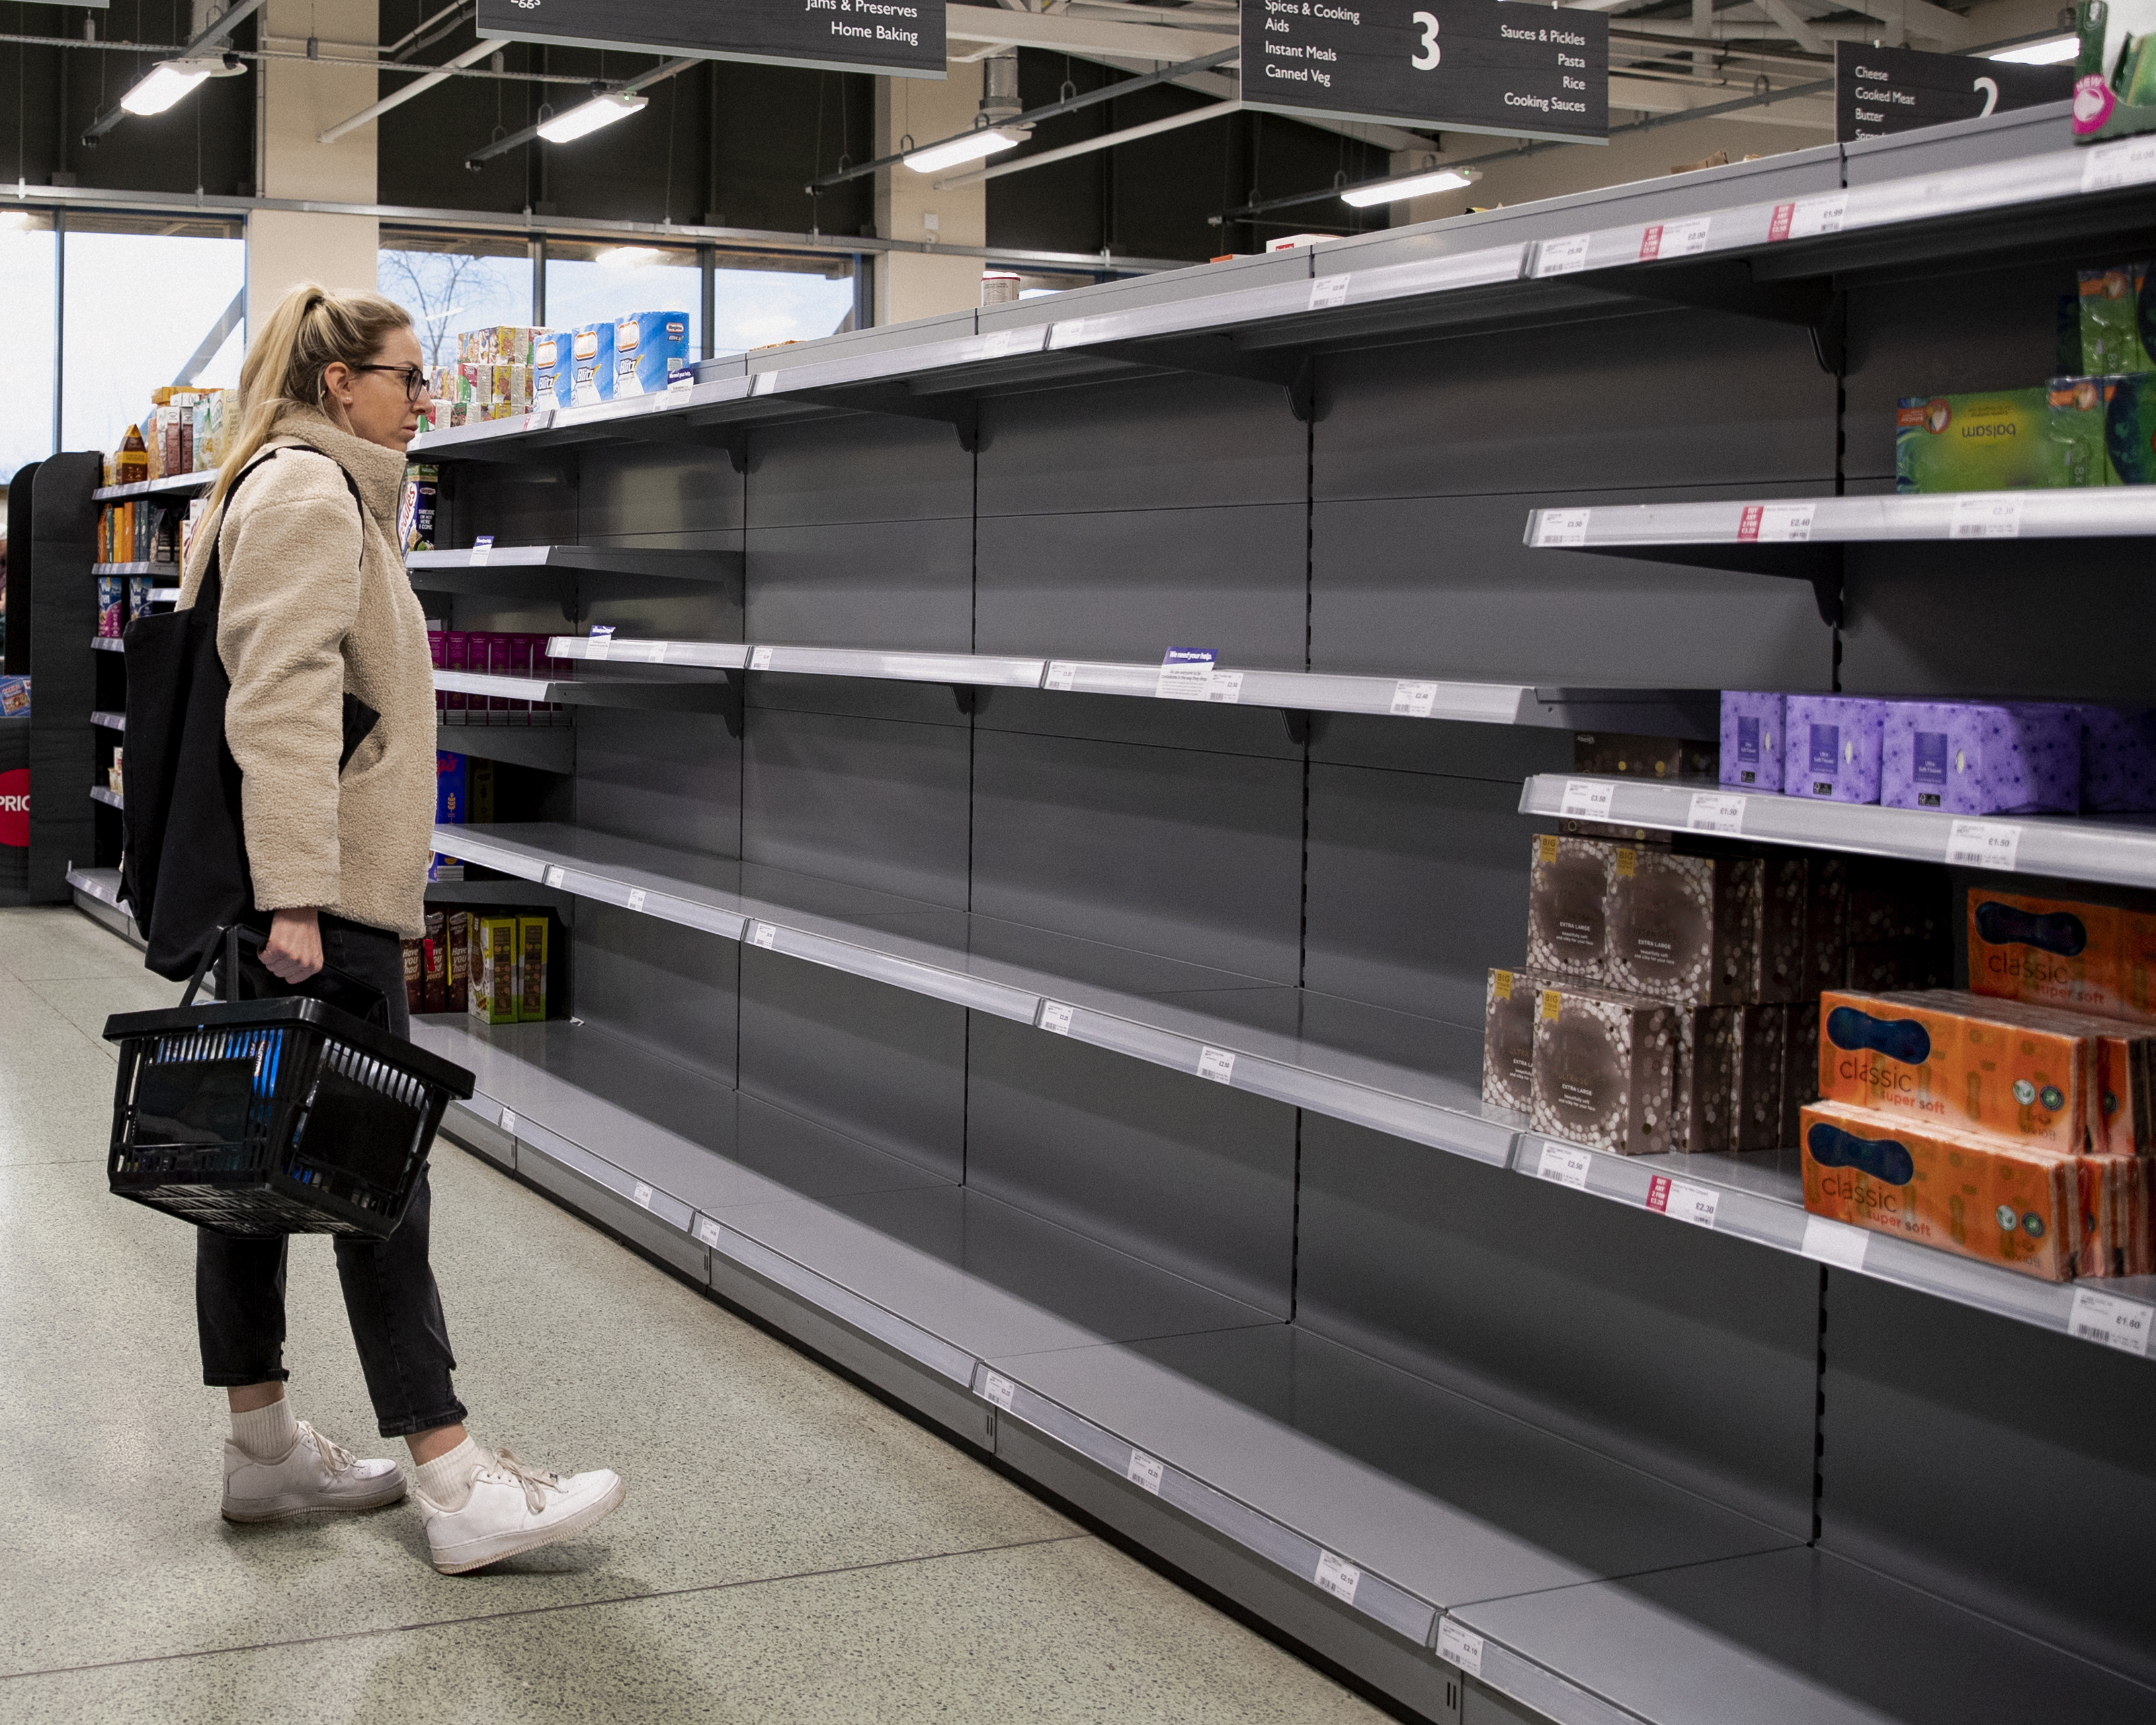 Shopper with a basket glances at mostly empty grocery shelves with few products